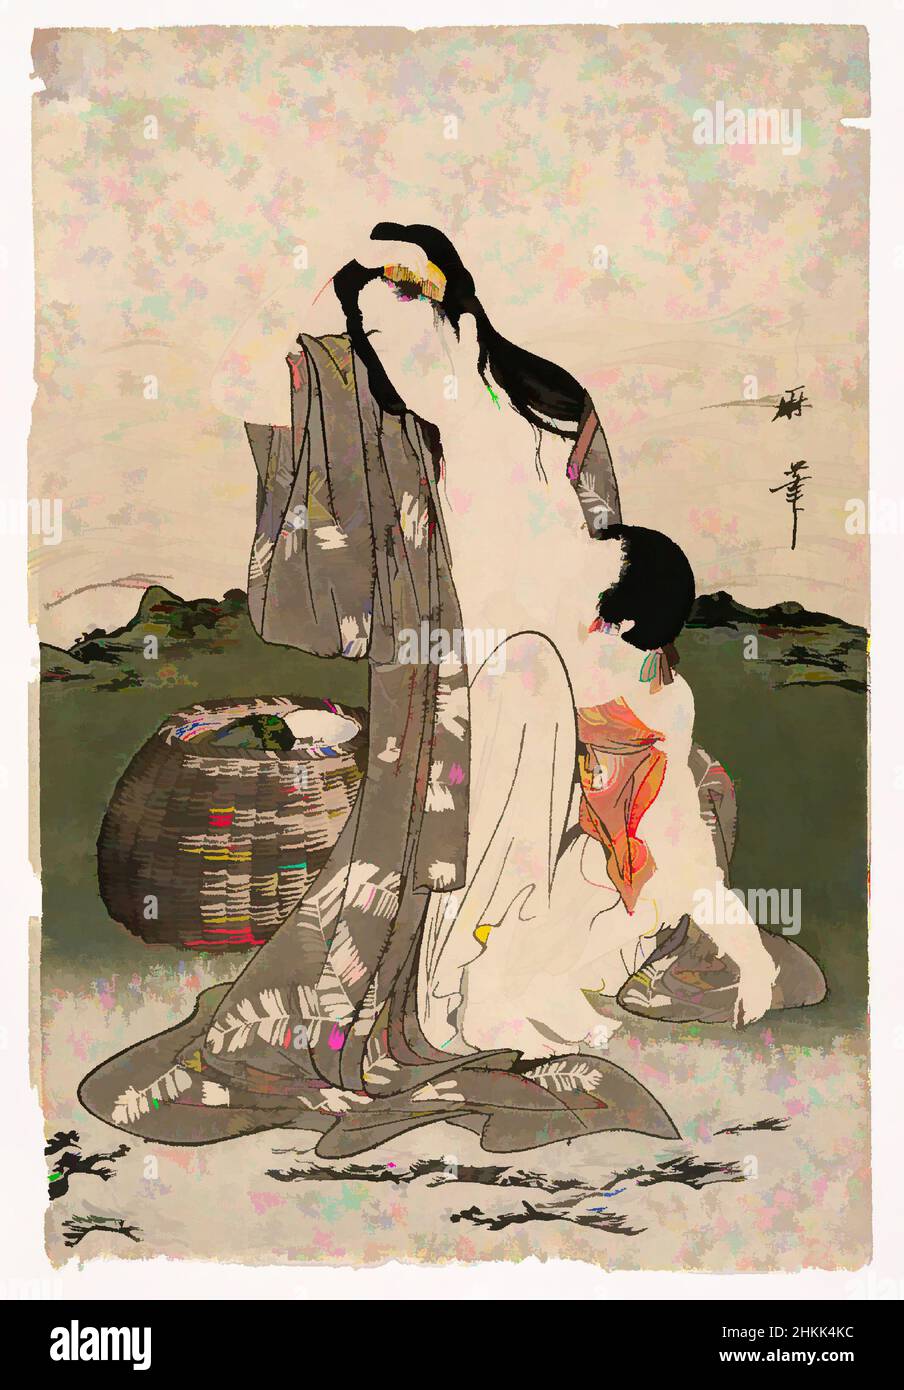 Art inspired by Abalone Divers, Kitagawa Utamaro, Japanese, 1753-1806, Color woodblock print on paper, Japan, ca. 1797-1798, Edo Period, 14 1/2 x 9 3/4 in., 36.8 x 24.8 cm, basket, breastfeeding, comb, intimate, mother and child, People, Classic works modernized by Artotop with a splash of modernity. Shapes, color and value, eye-catching visual impact on art. Emotions through freedom of artworks in a contemporary way. A timeless message pursuing a wildly creative new direction. Artists turning to the digital medium and creating the Artotop NFT Stock Photo